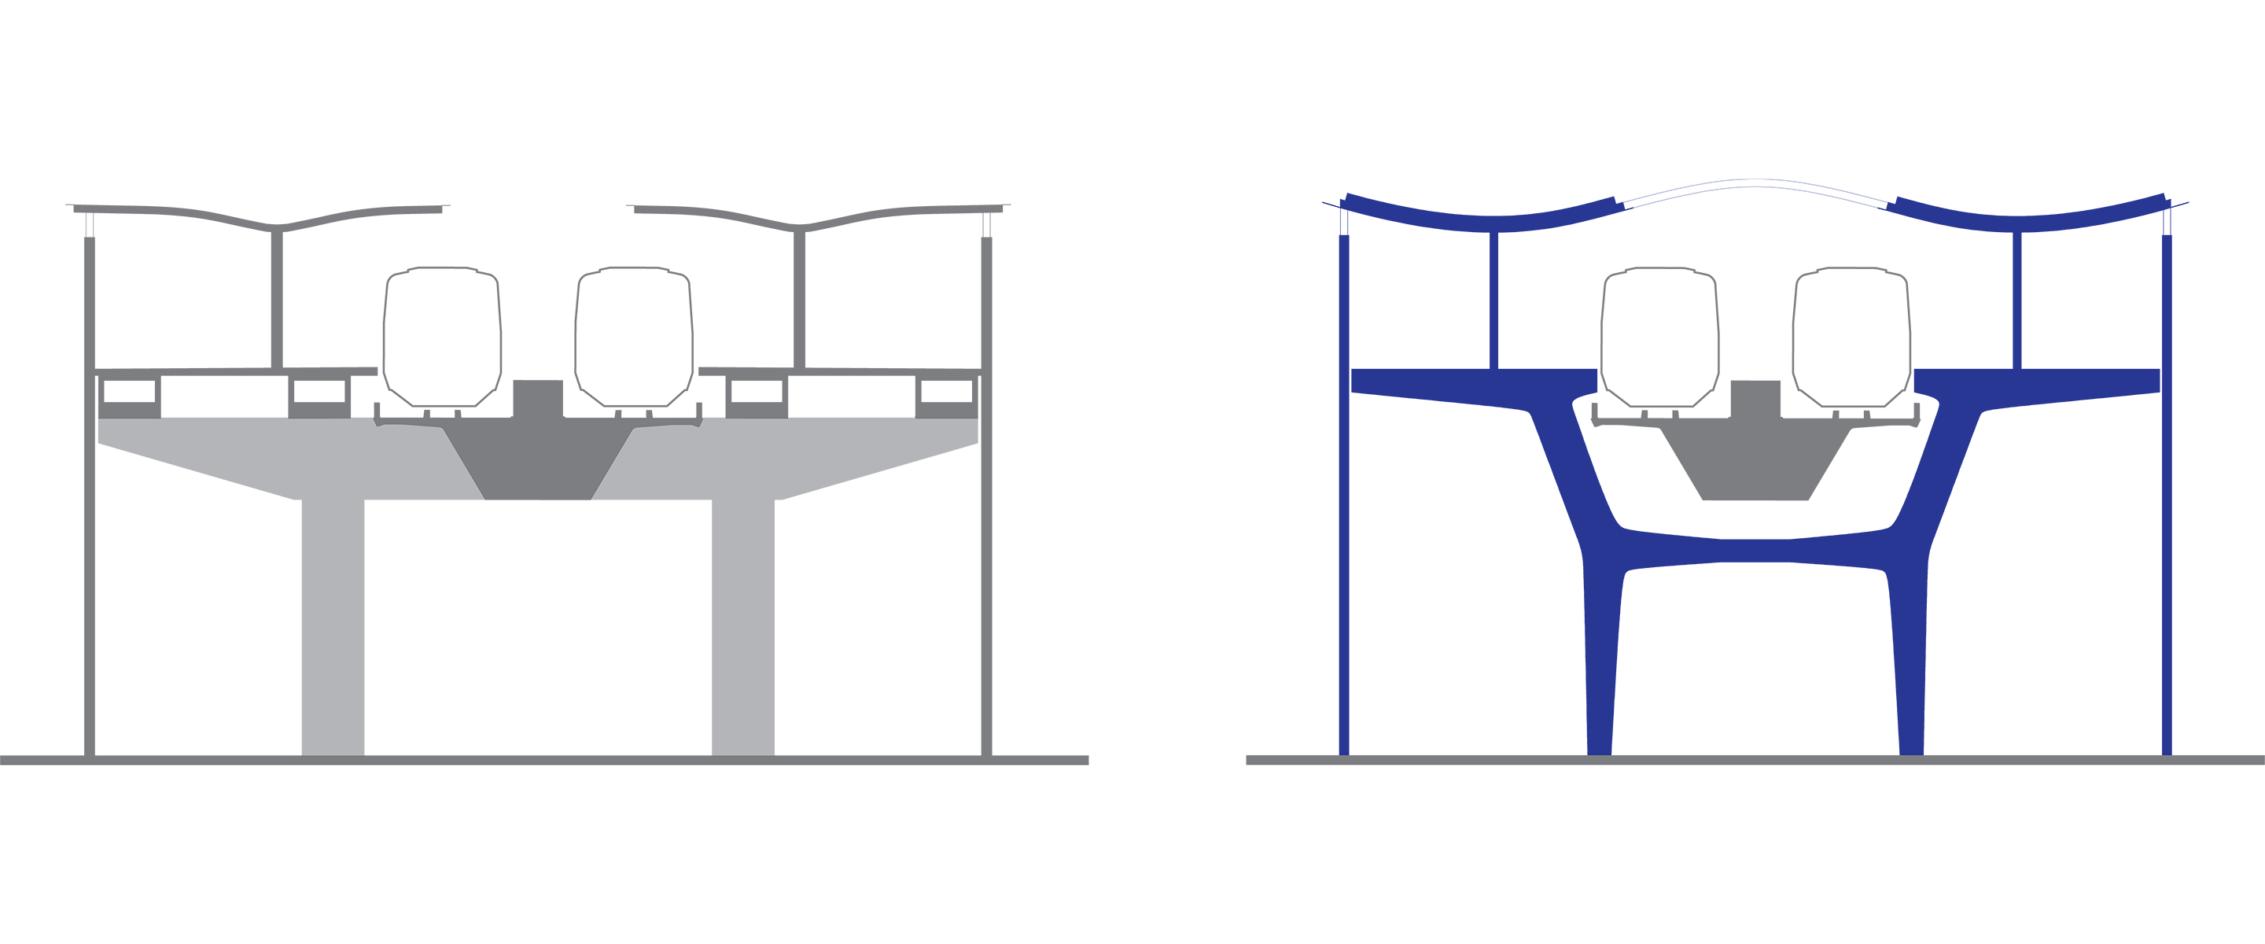 Section diagram showing typical station vs prototype infill station